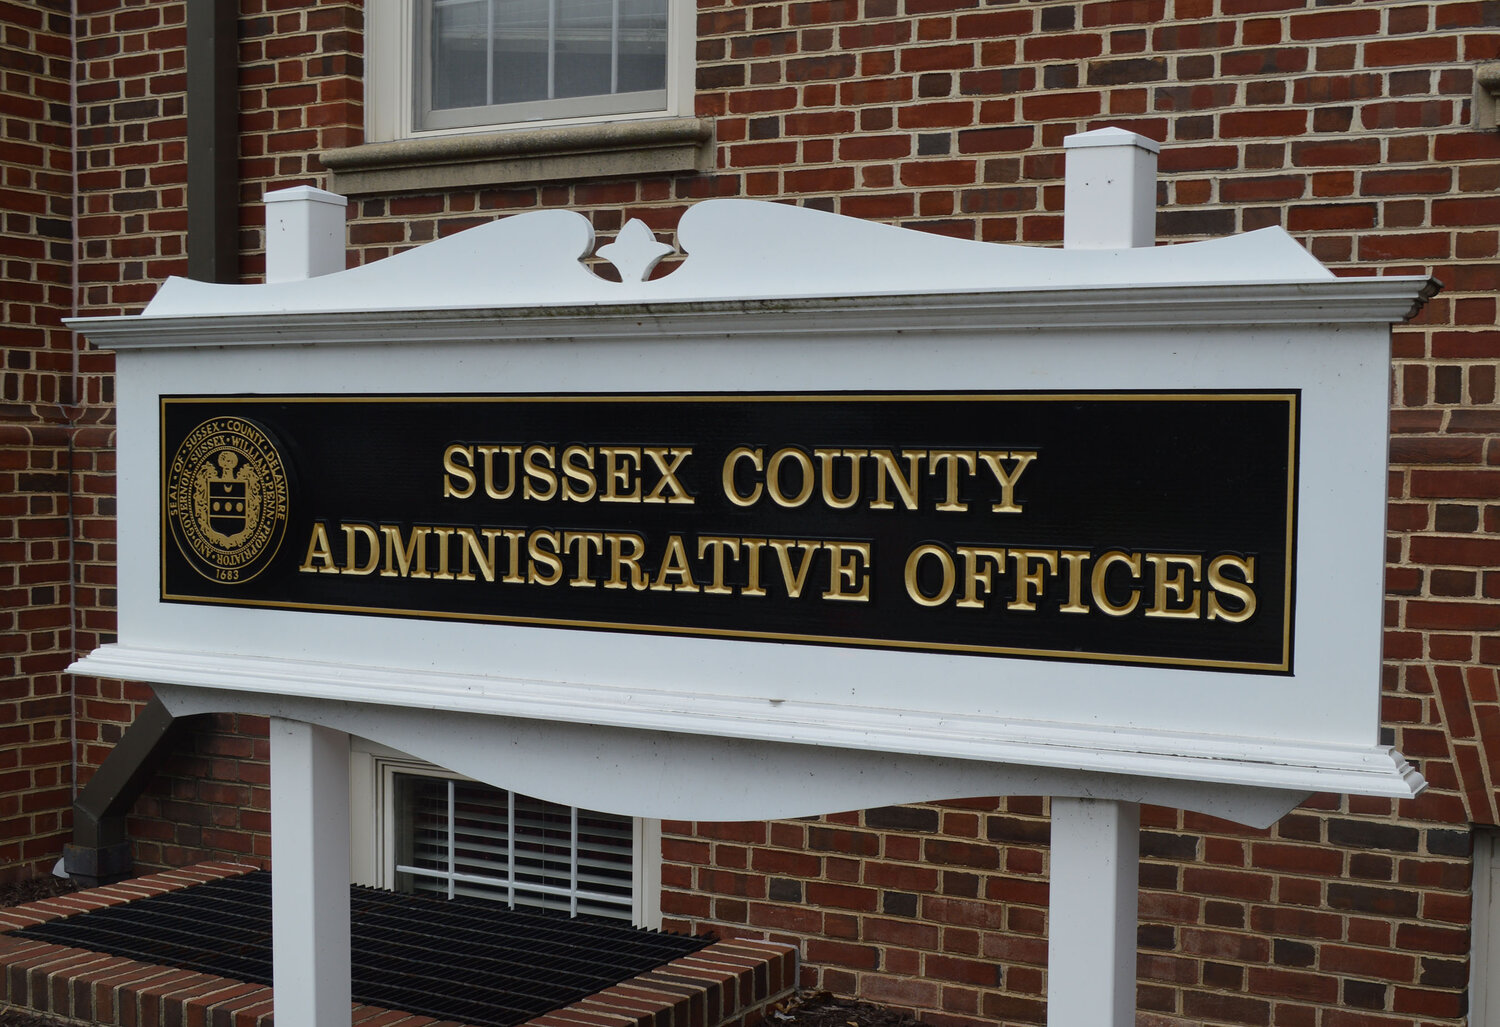 Sussex county offices in Georgetown